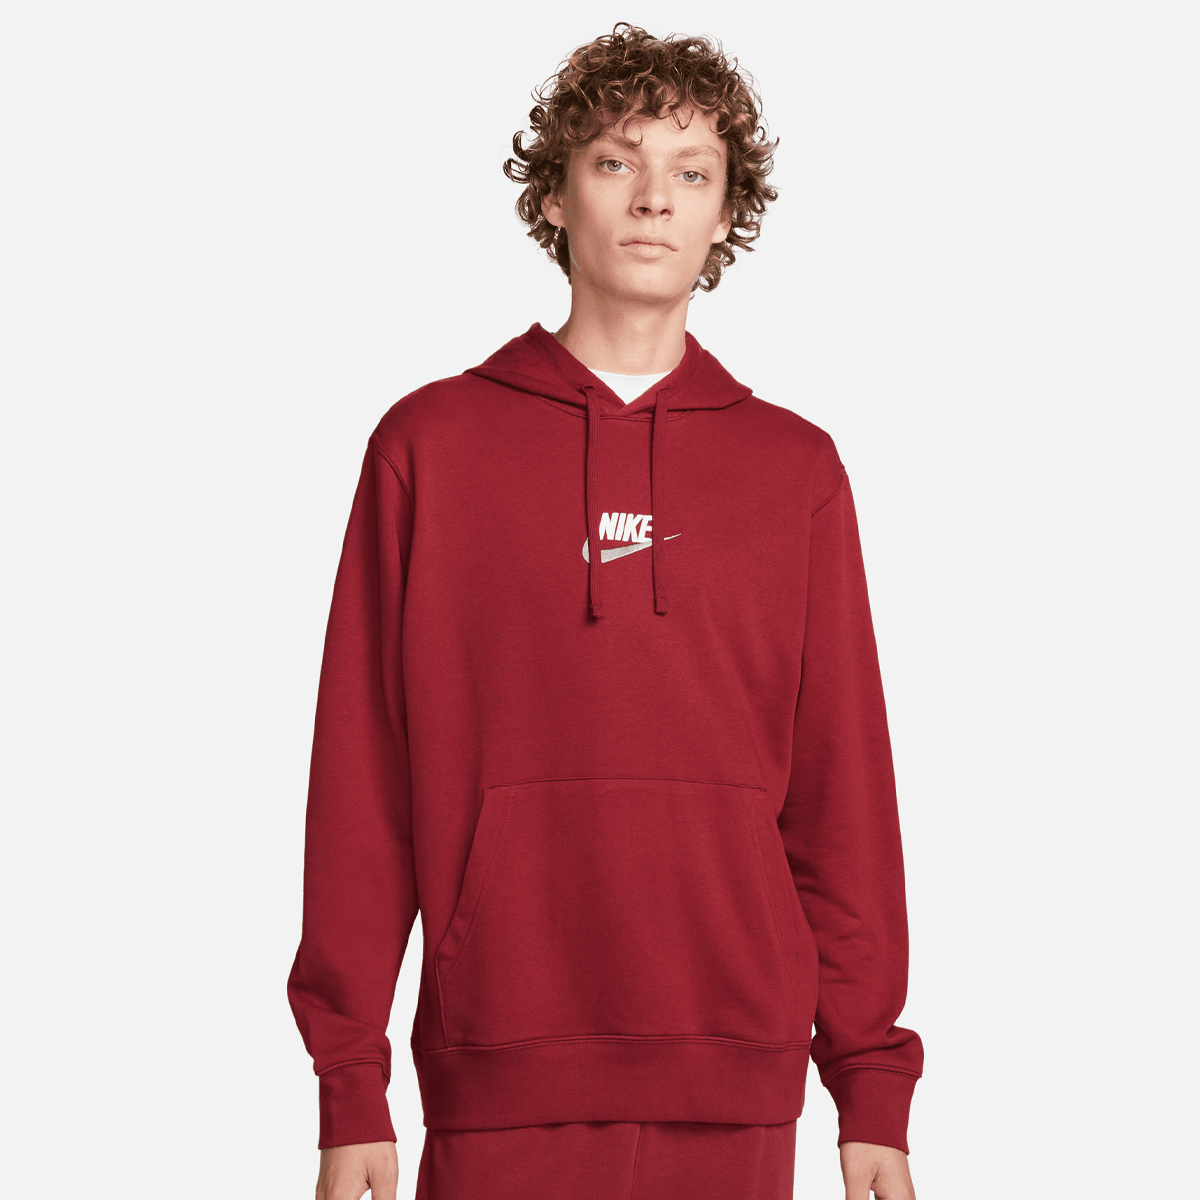 club + french terry pullover hoodie lbr, nike, apparel, team red/team red, taille: s